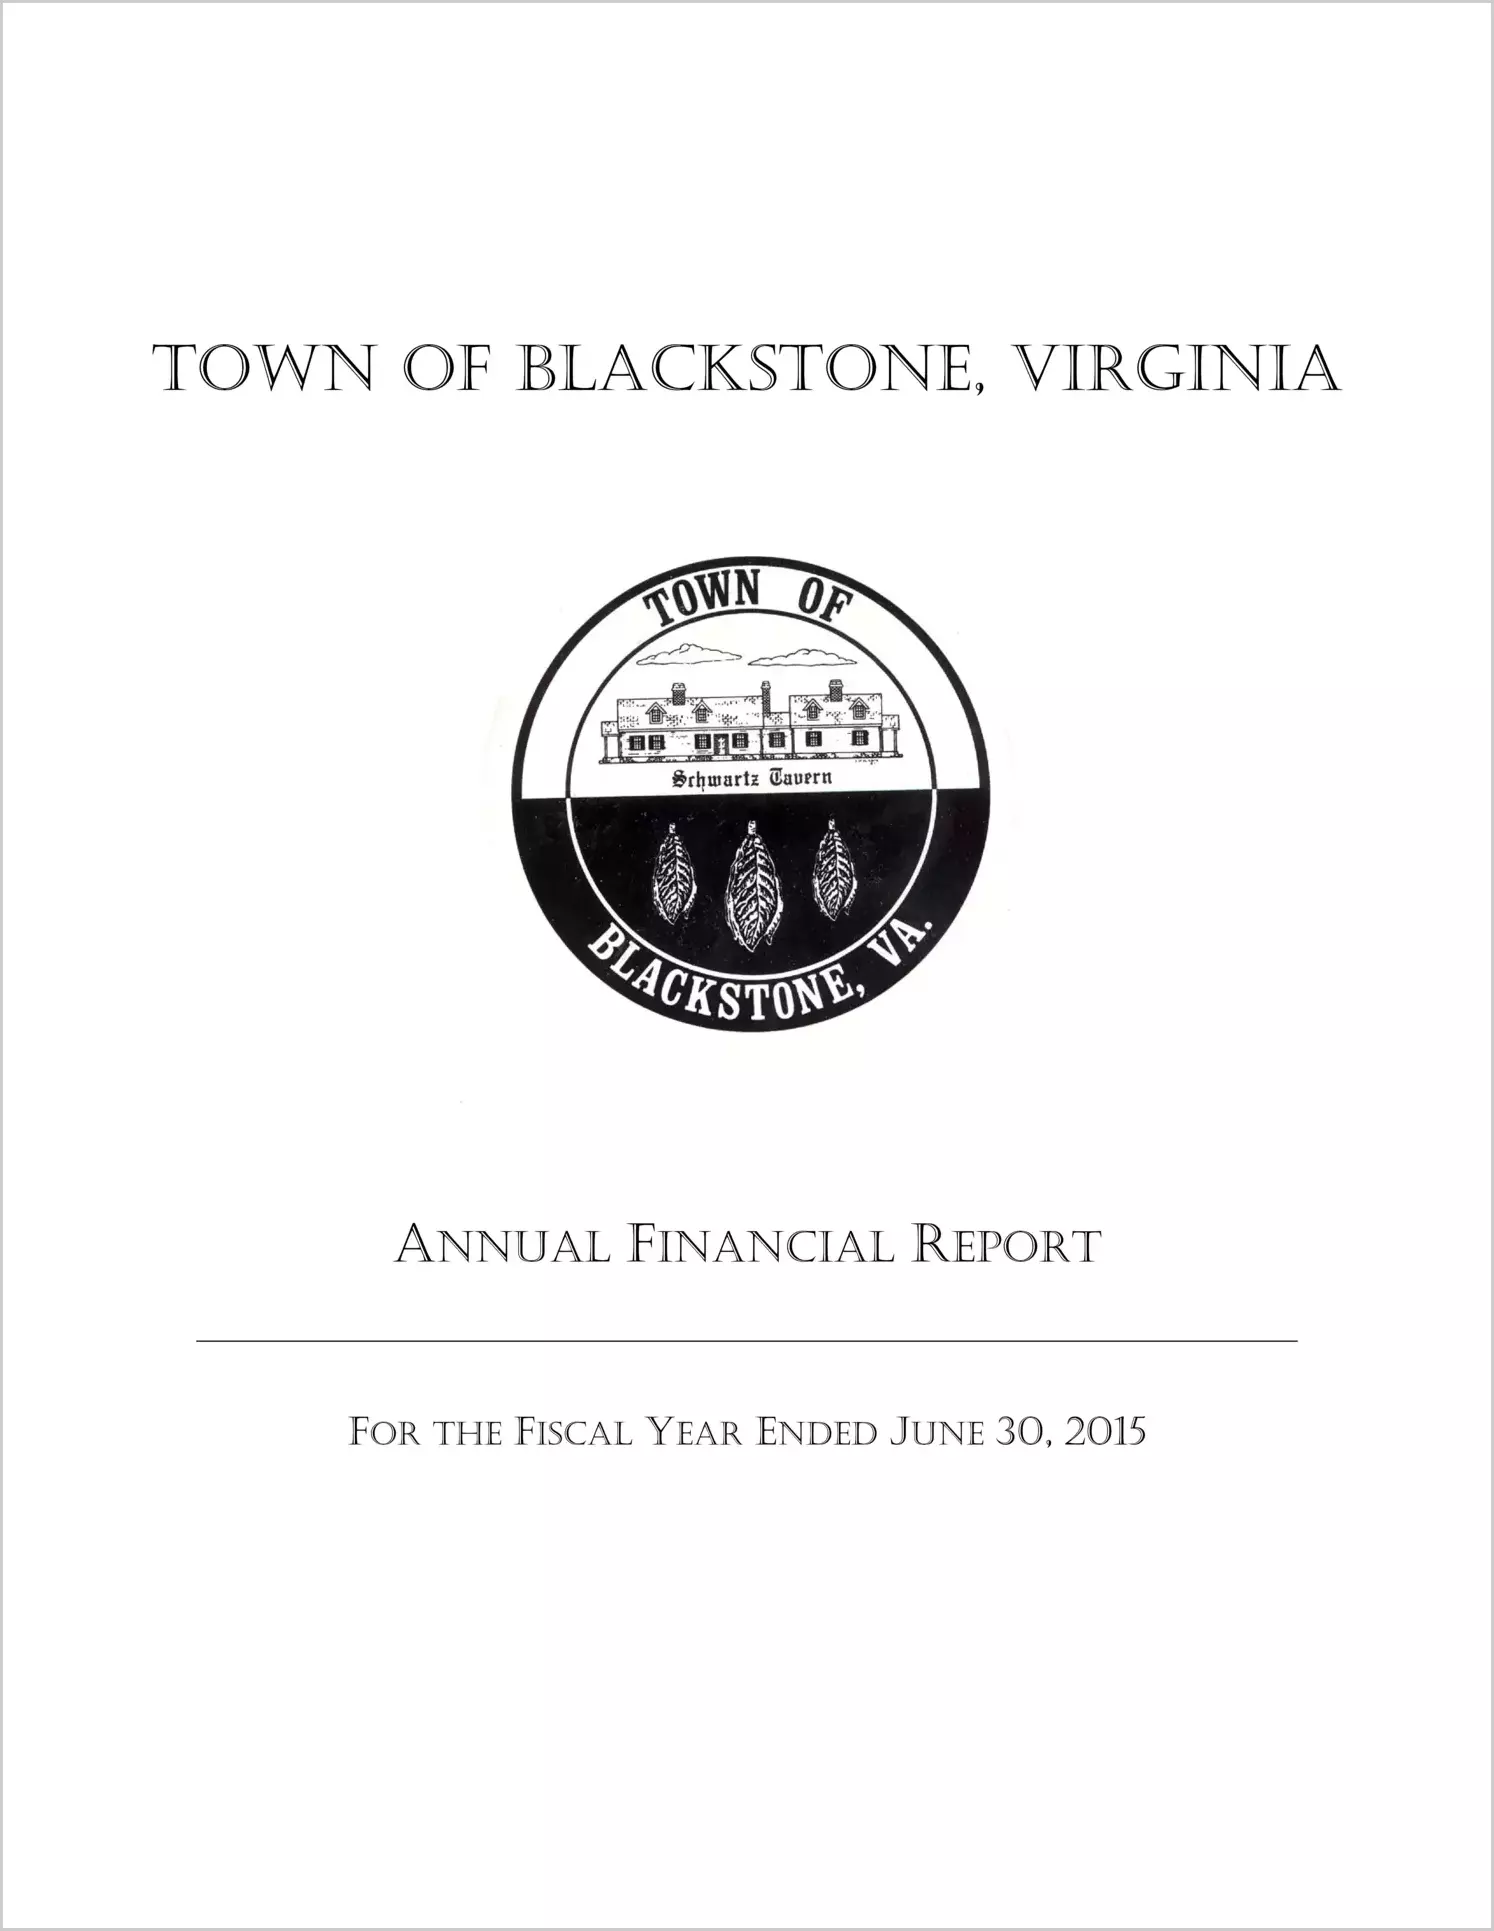 2015 Annual Financial Report for Town of Blackstone